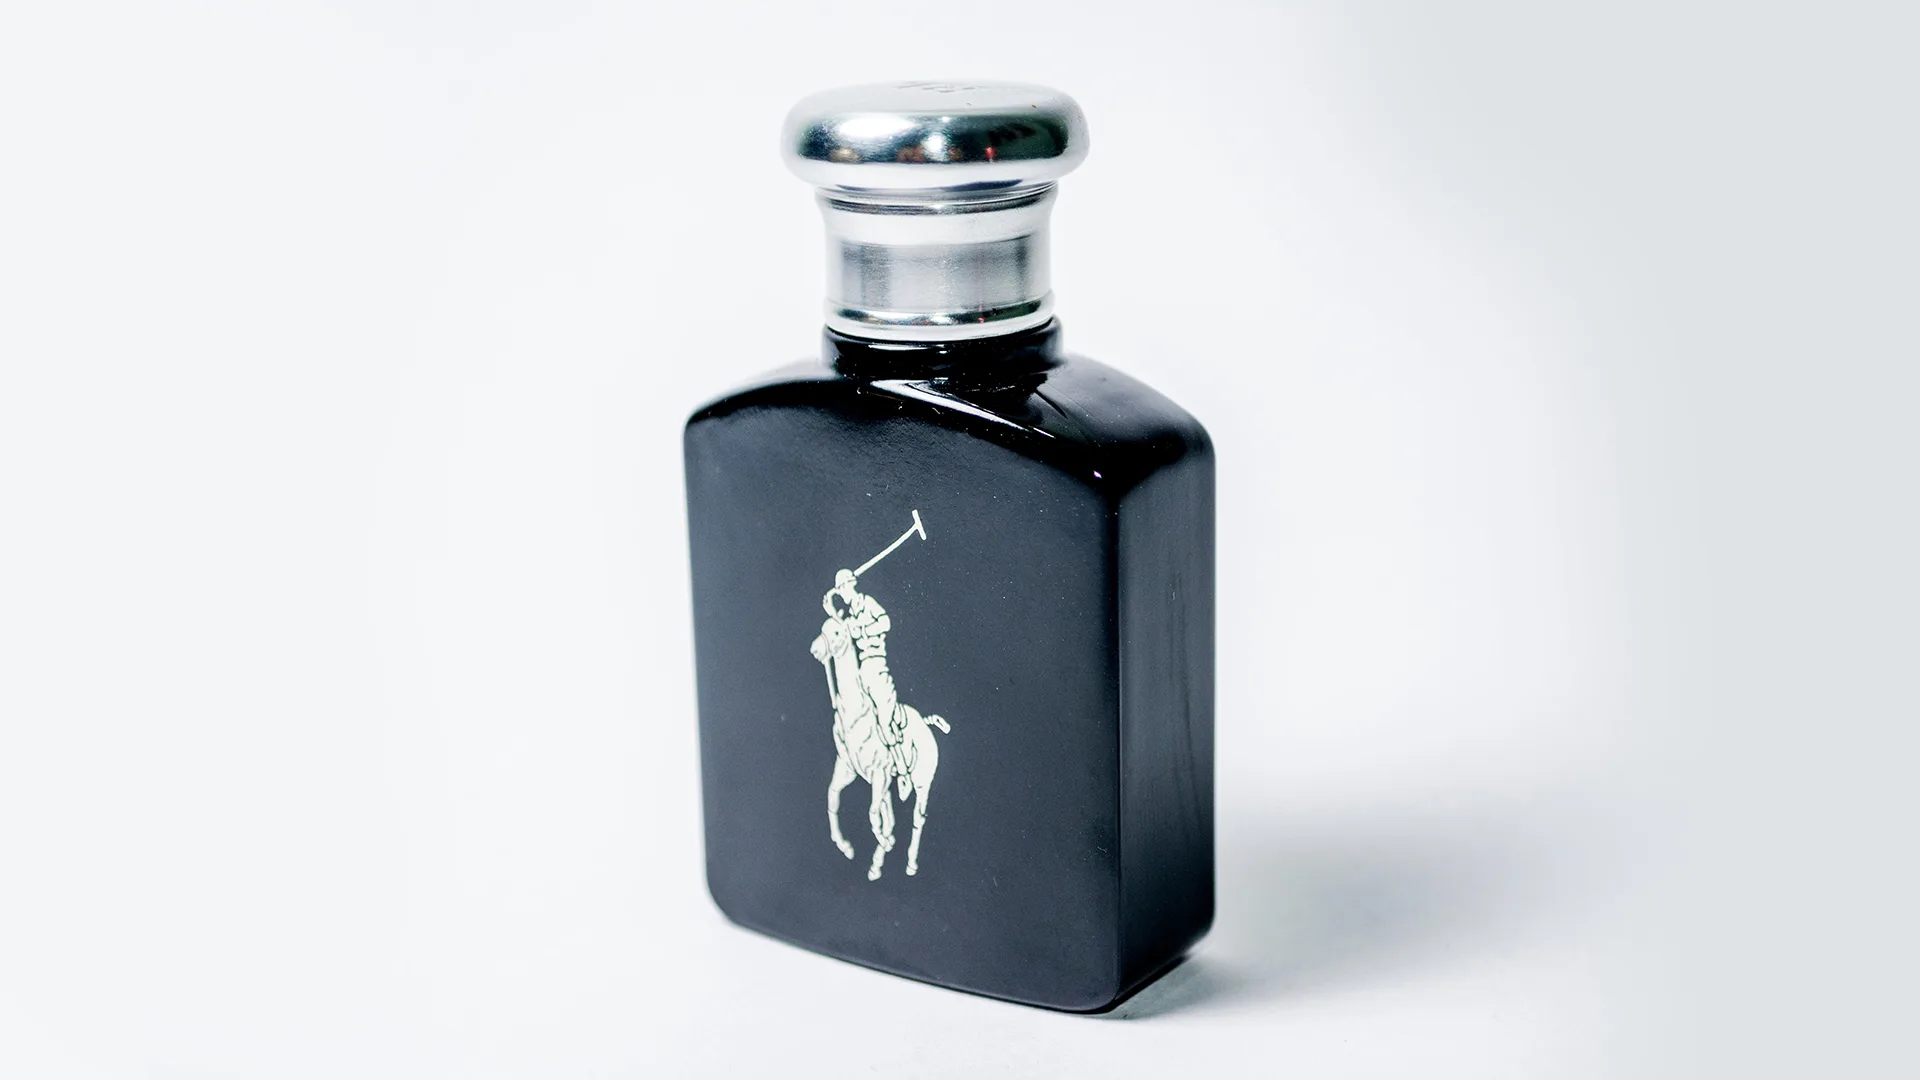 Bottle of Ralph Lauren Polo cologne against a grey background